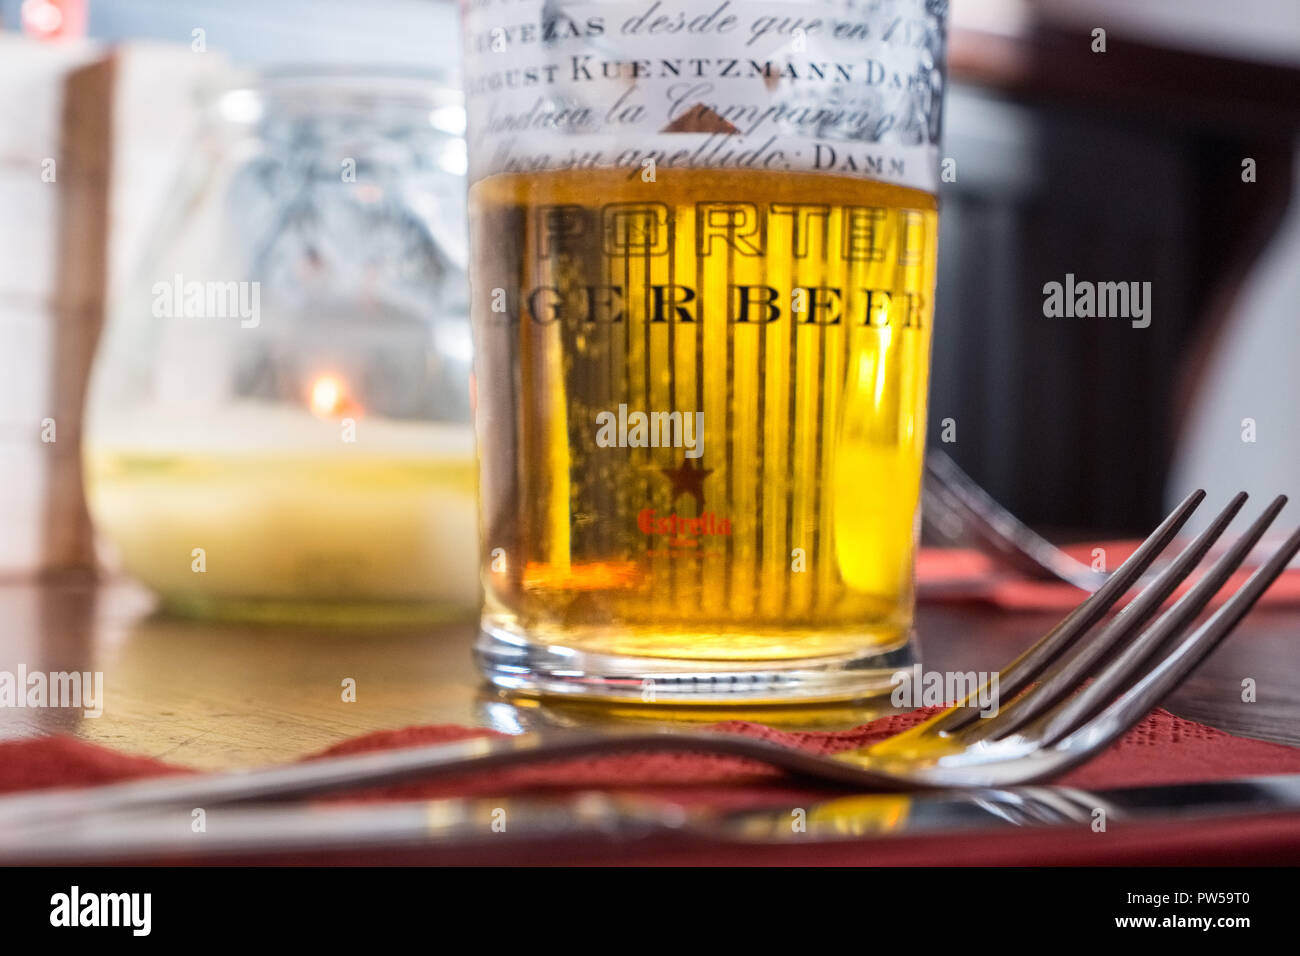 Half drunk glass of lager beer and a fork on a table in a bar Stock Photo